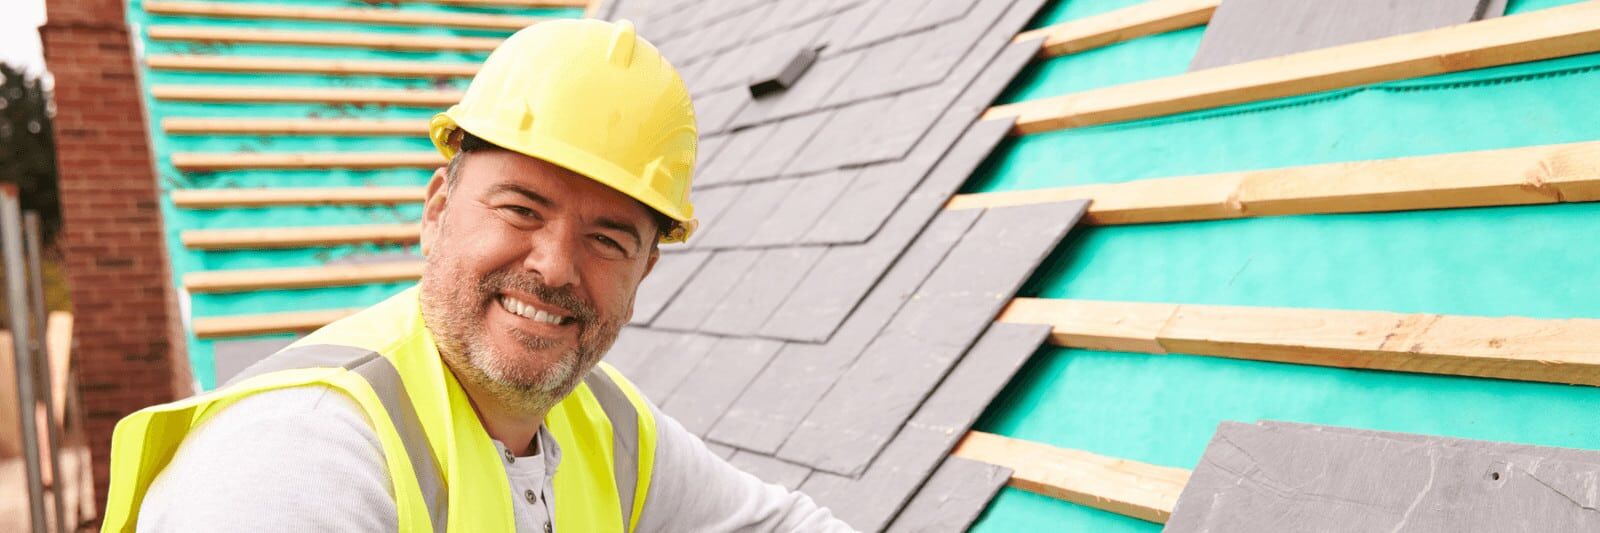 gift ideas for roofers